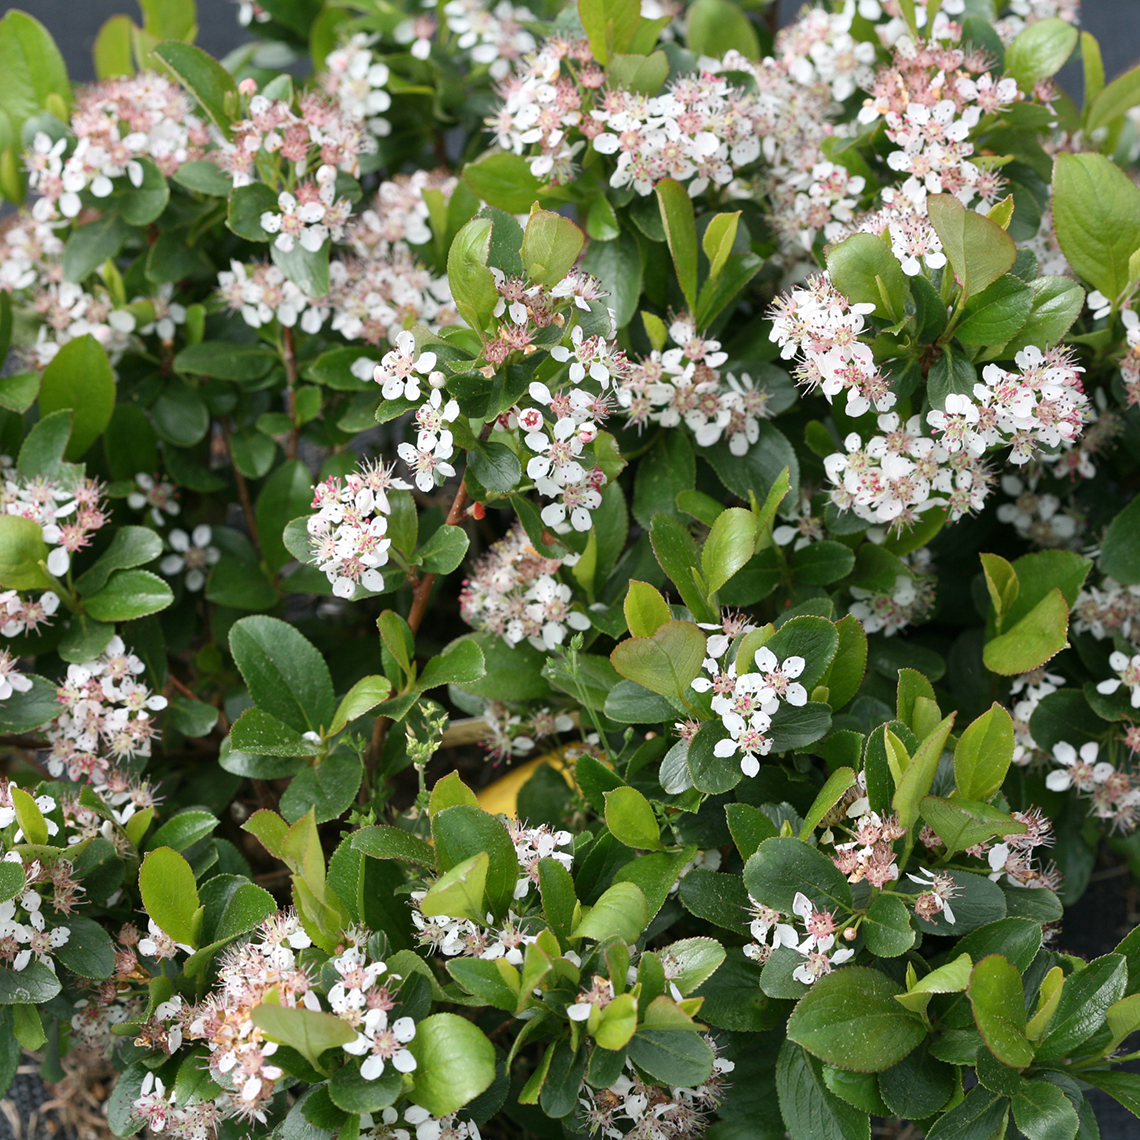 Close up of Low Scape Mound Aronia's white flowers